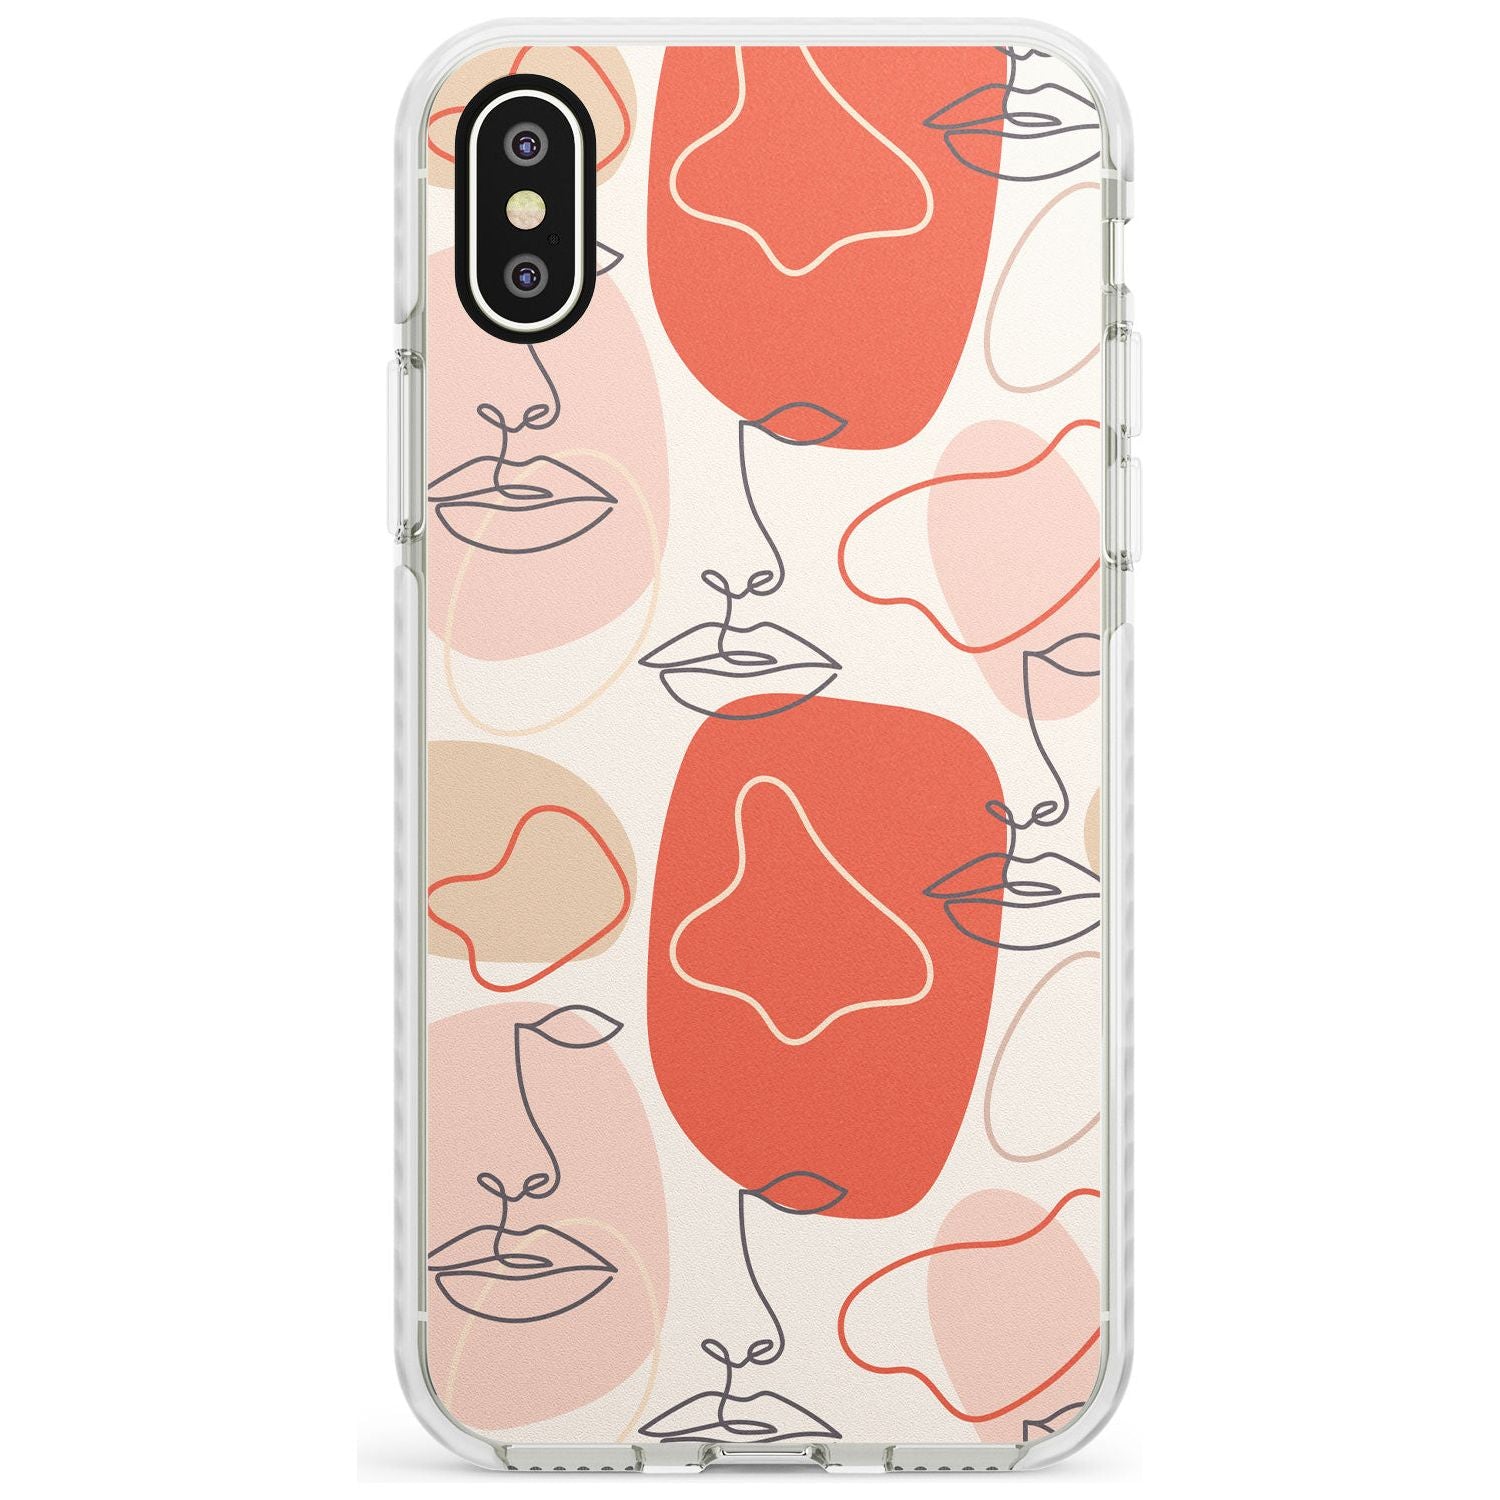 Minimal Line Art Stylish Abstract Faces Impact Phone Case for iPhone X XS Max XR